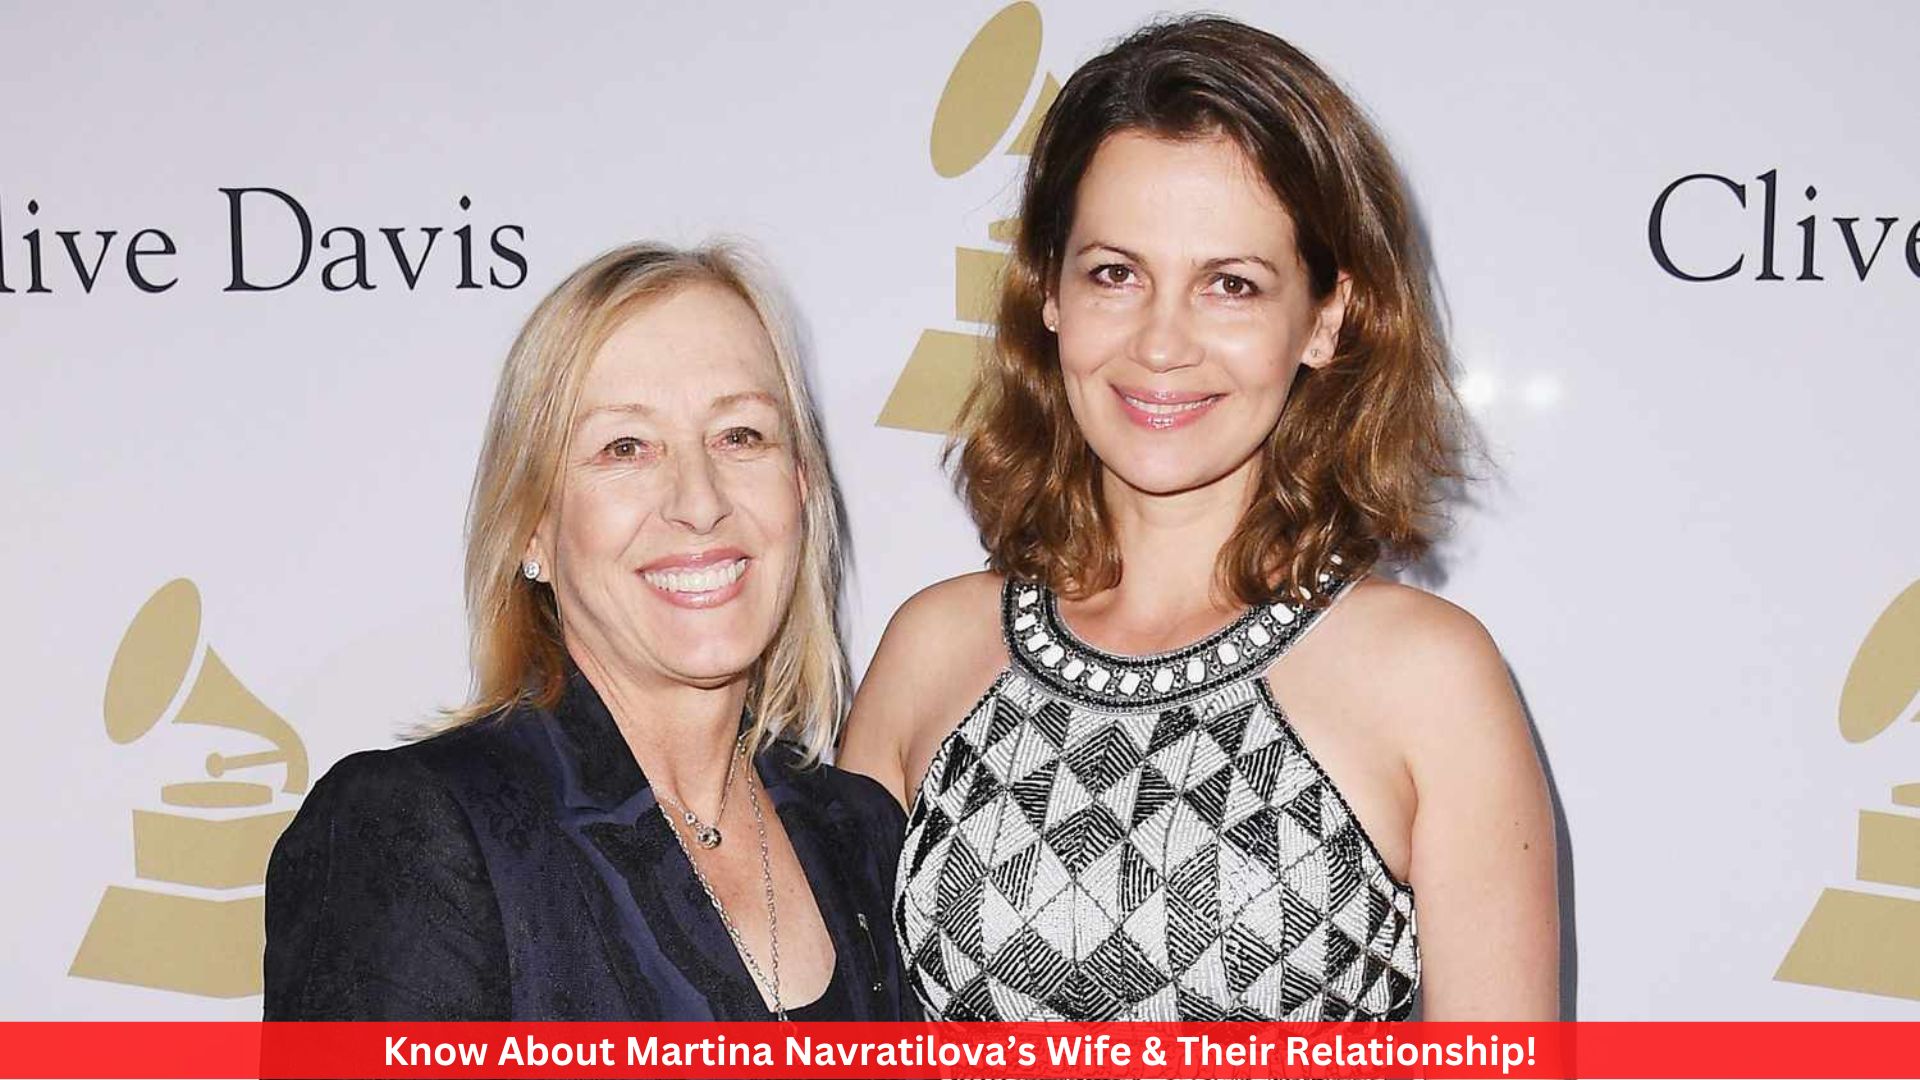 Know About Martina Navratilova’s Wife & Their Relationship!